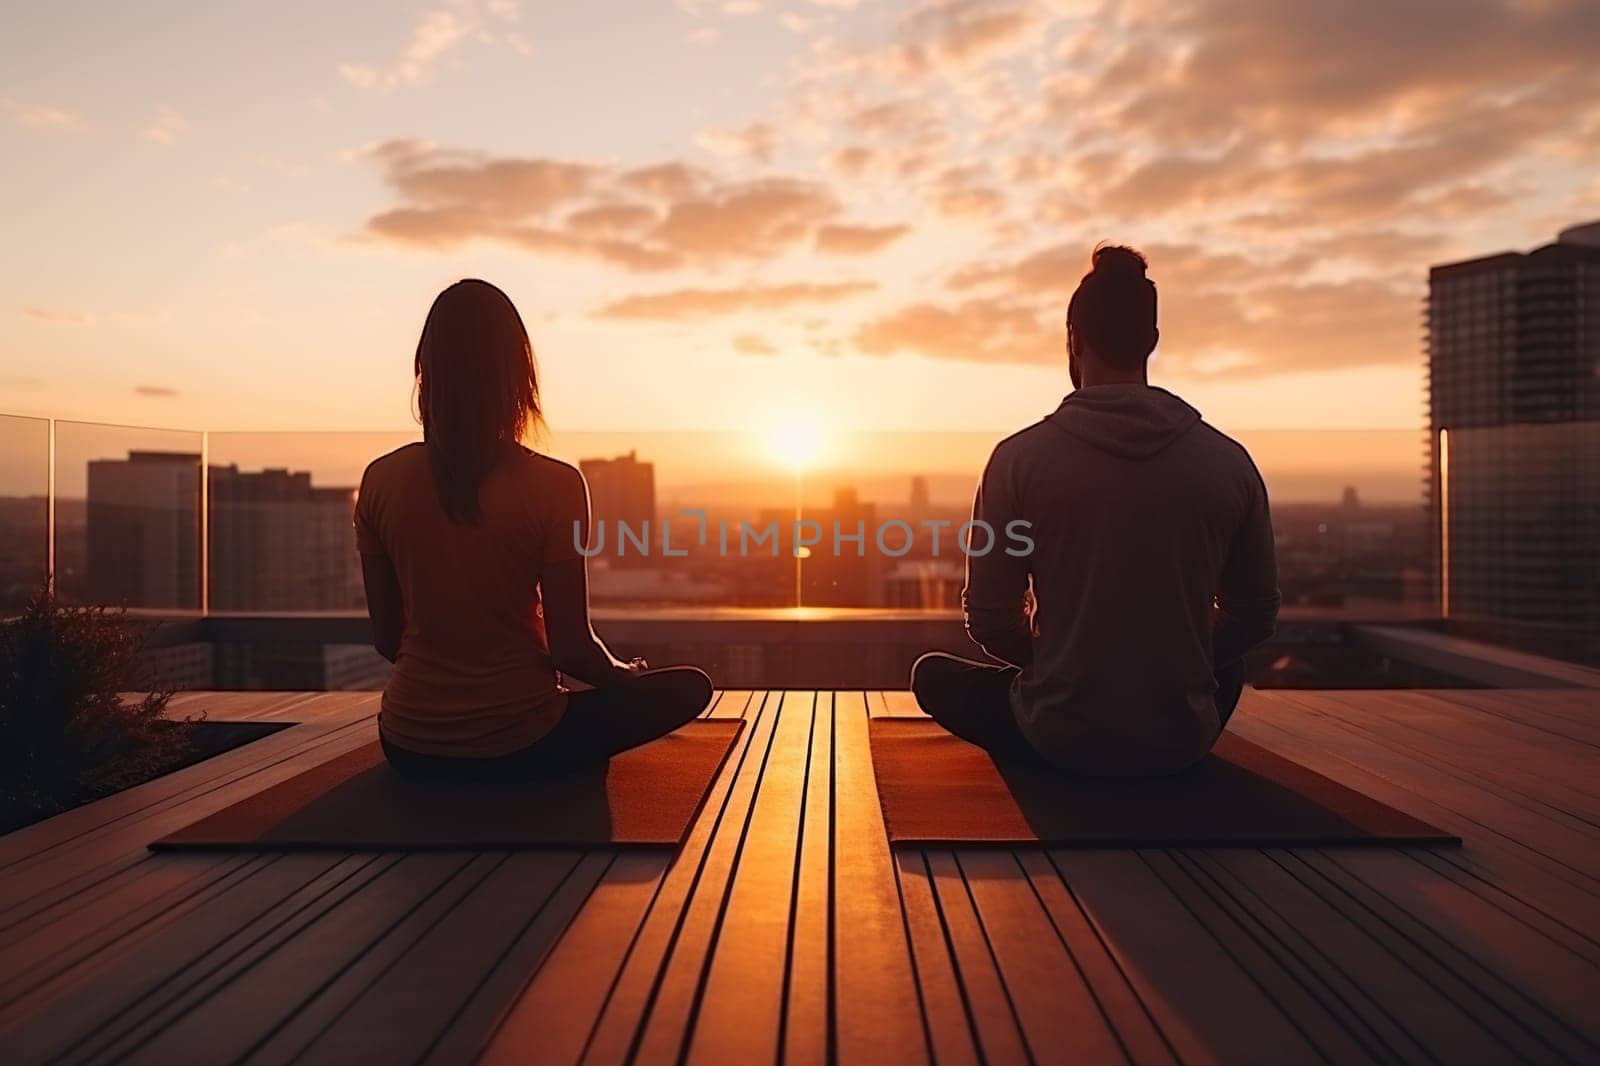 A man and a woman do yoga on the roof of a building at sunset, dawn.